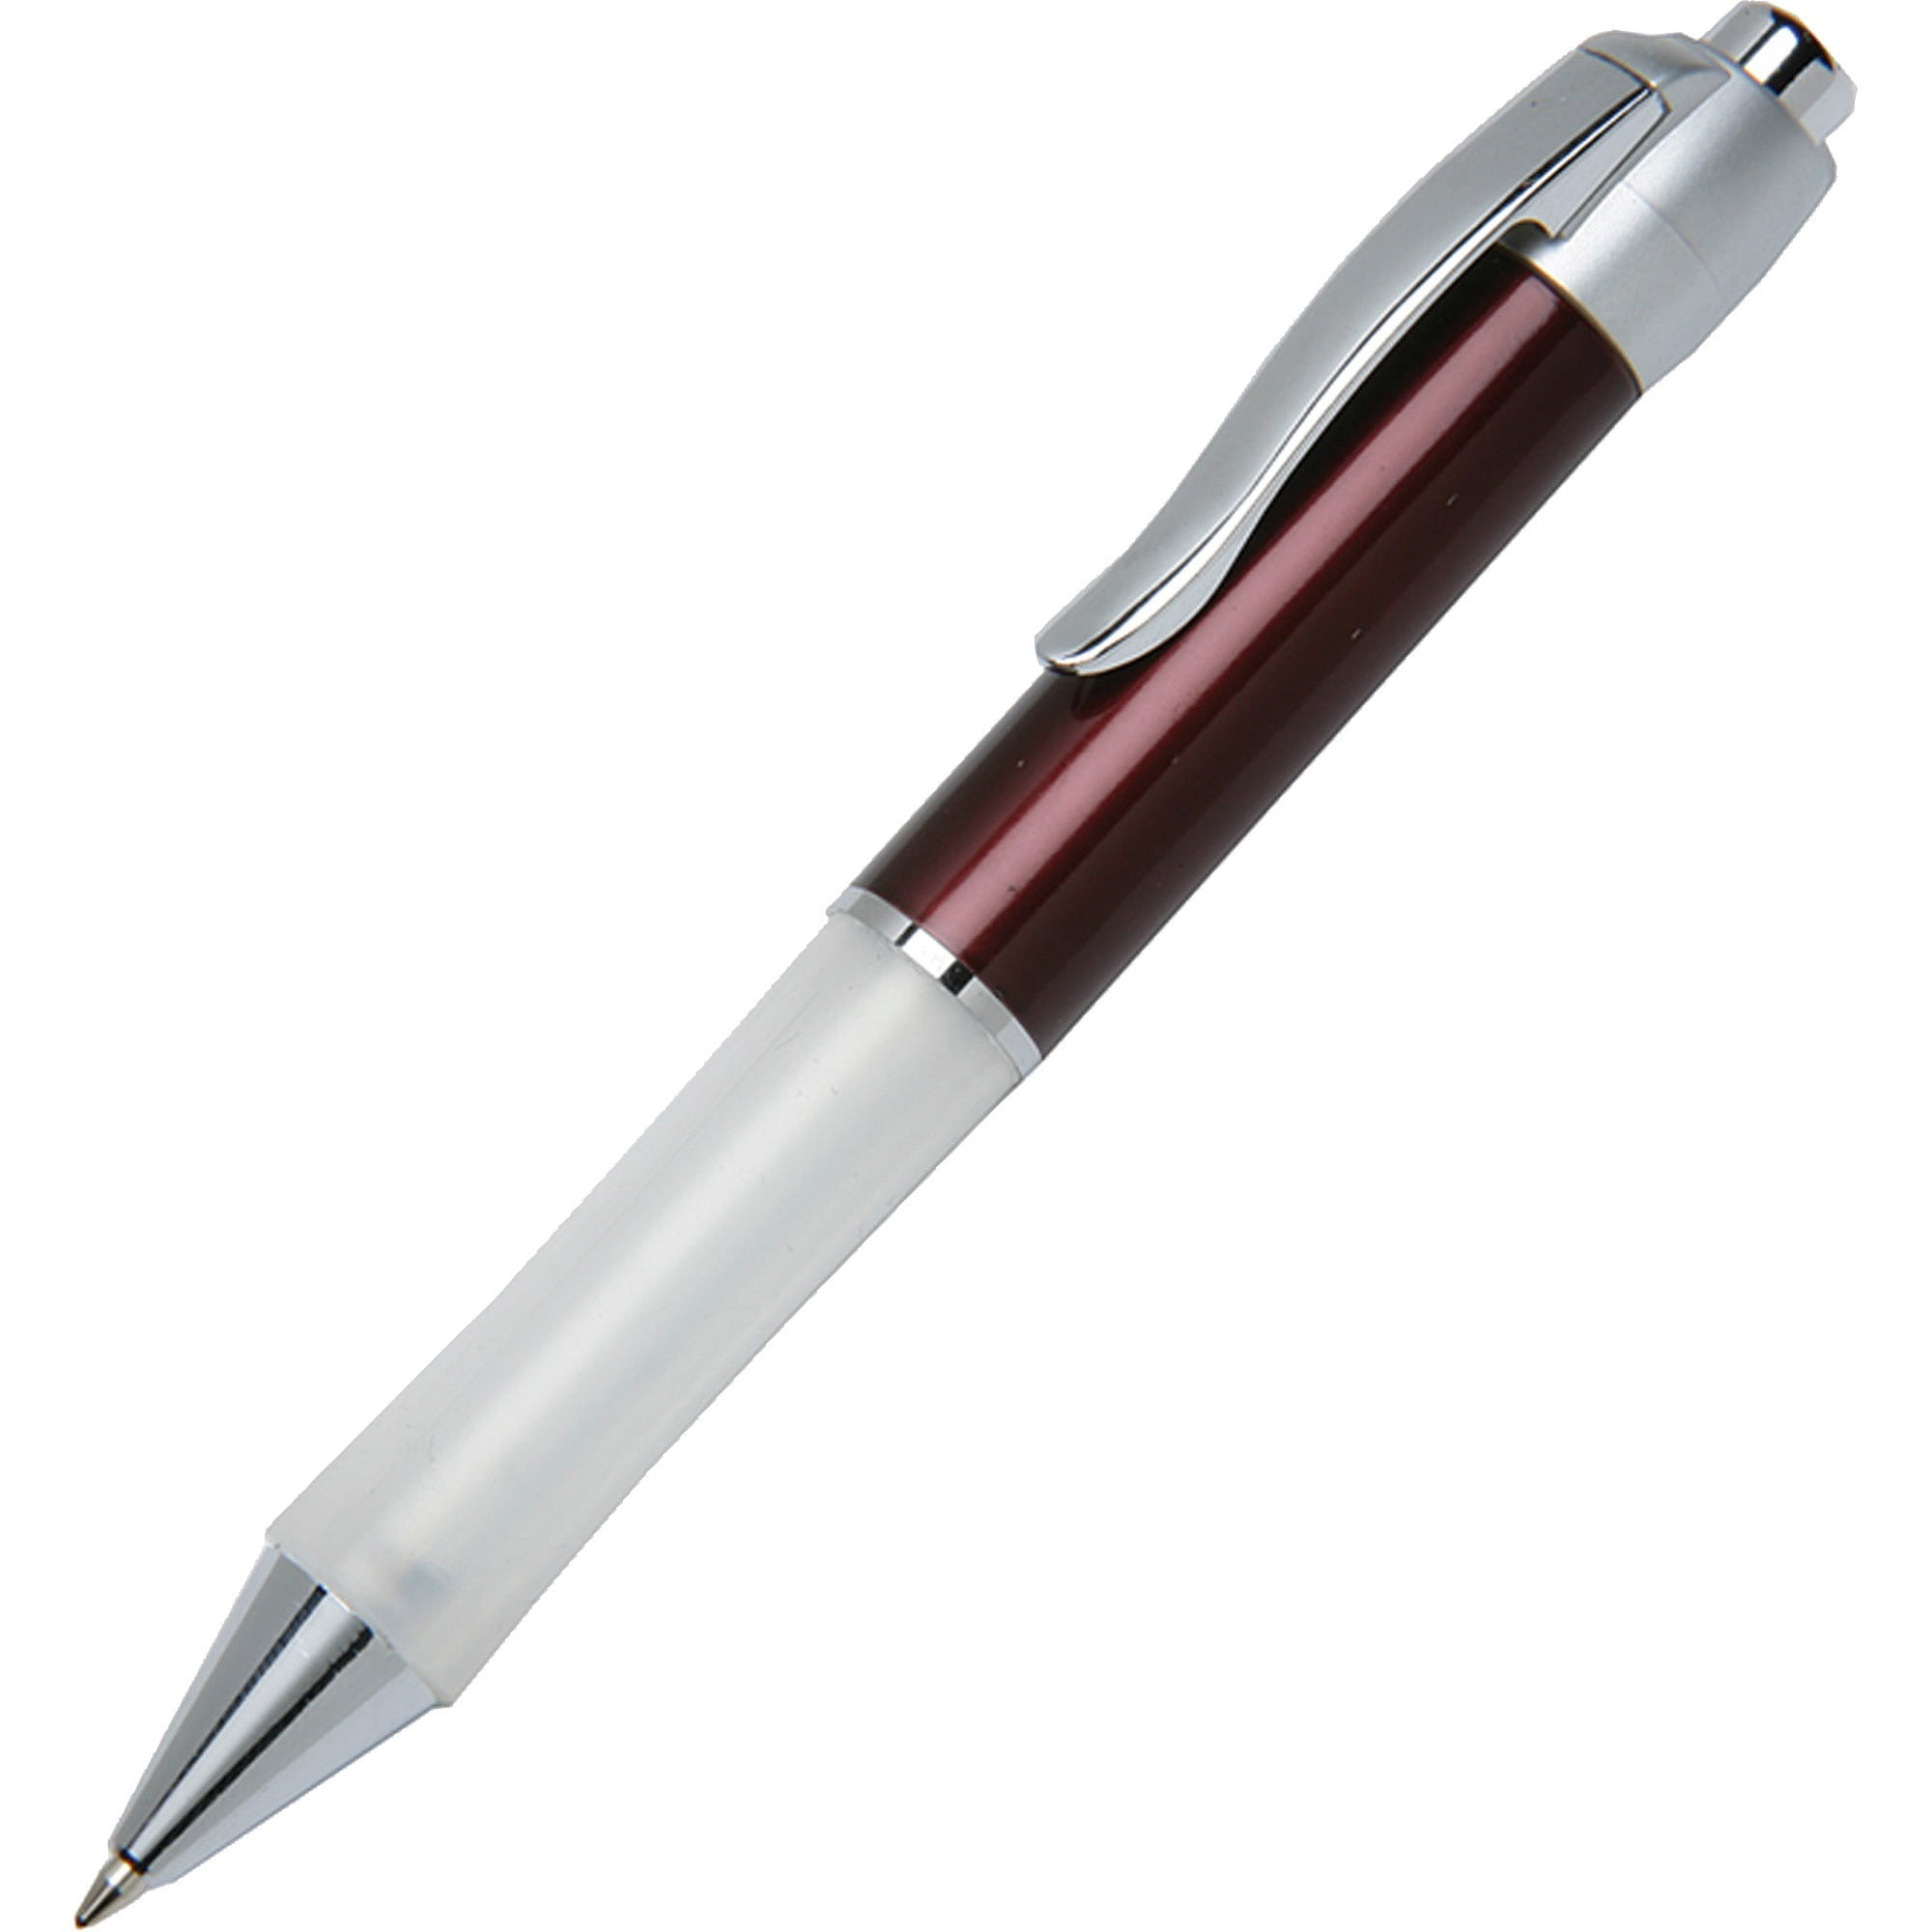 Well-made Ergonomic Retractable-Point Ink Pen High Quality Executive Pen 